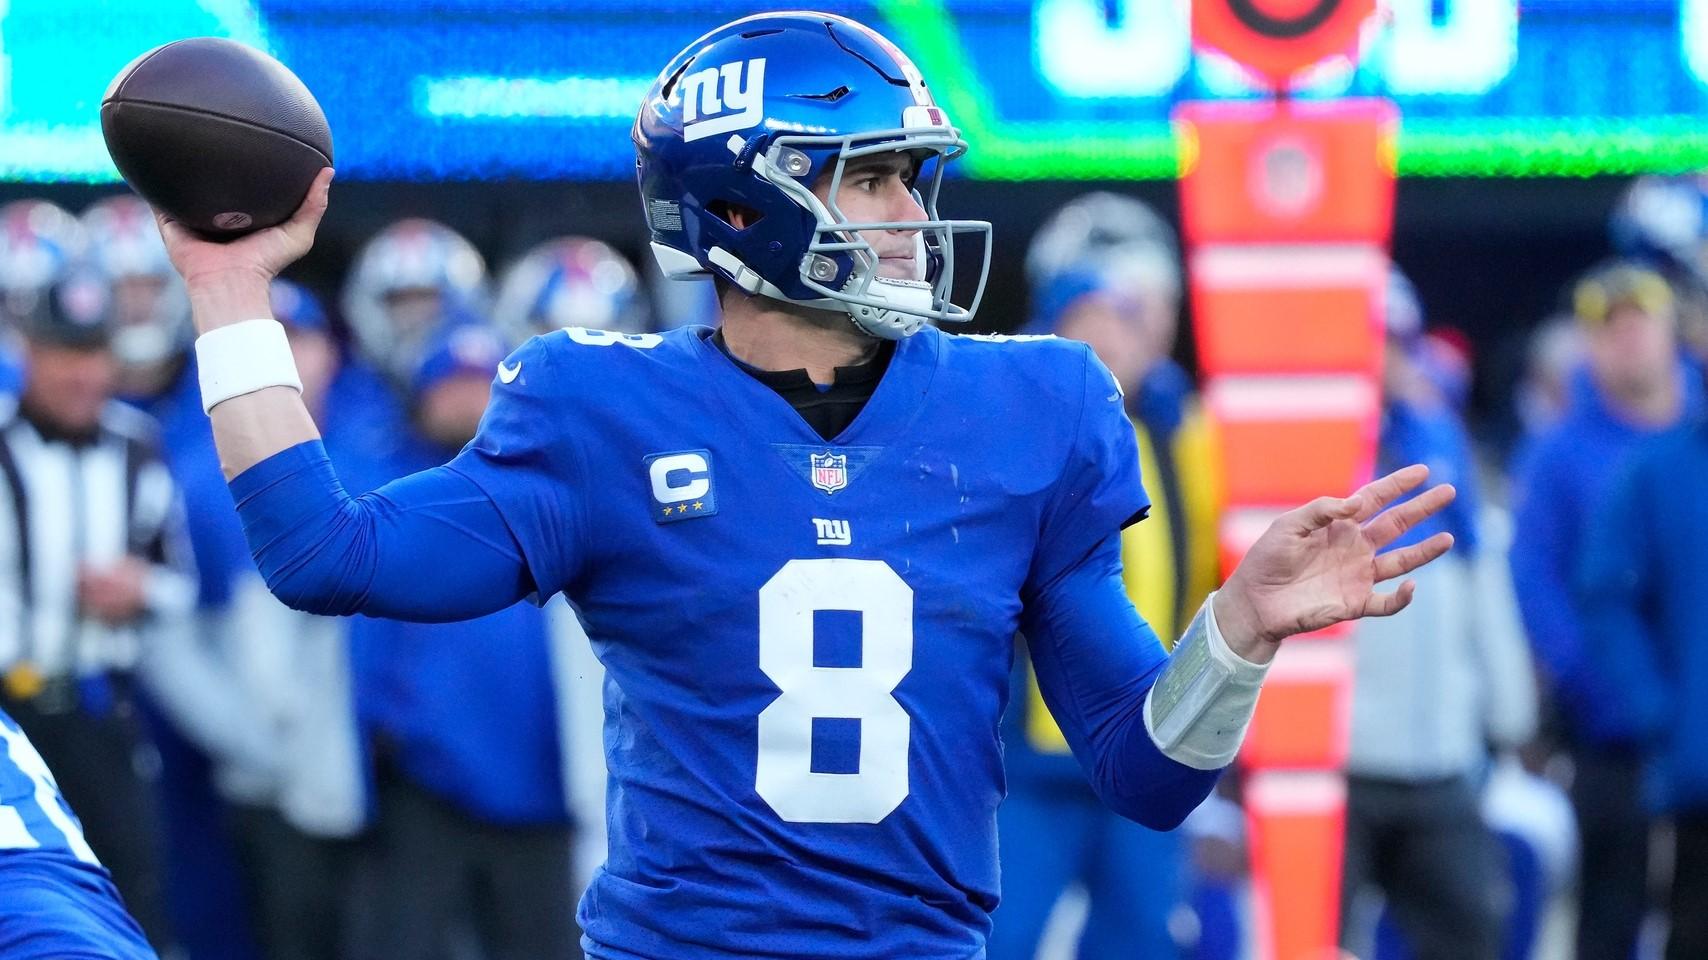 Nov 20, 2022; East Rutherford, NJ, USA; New York Giants quarterback Daniel Jones (8) throws against the Detroit Lions in the second half at MetLife Stadium. / Robert Deutsch-USA TODAY Sports